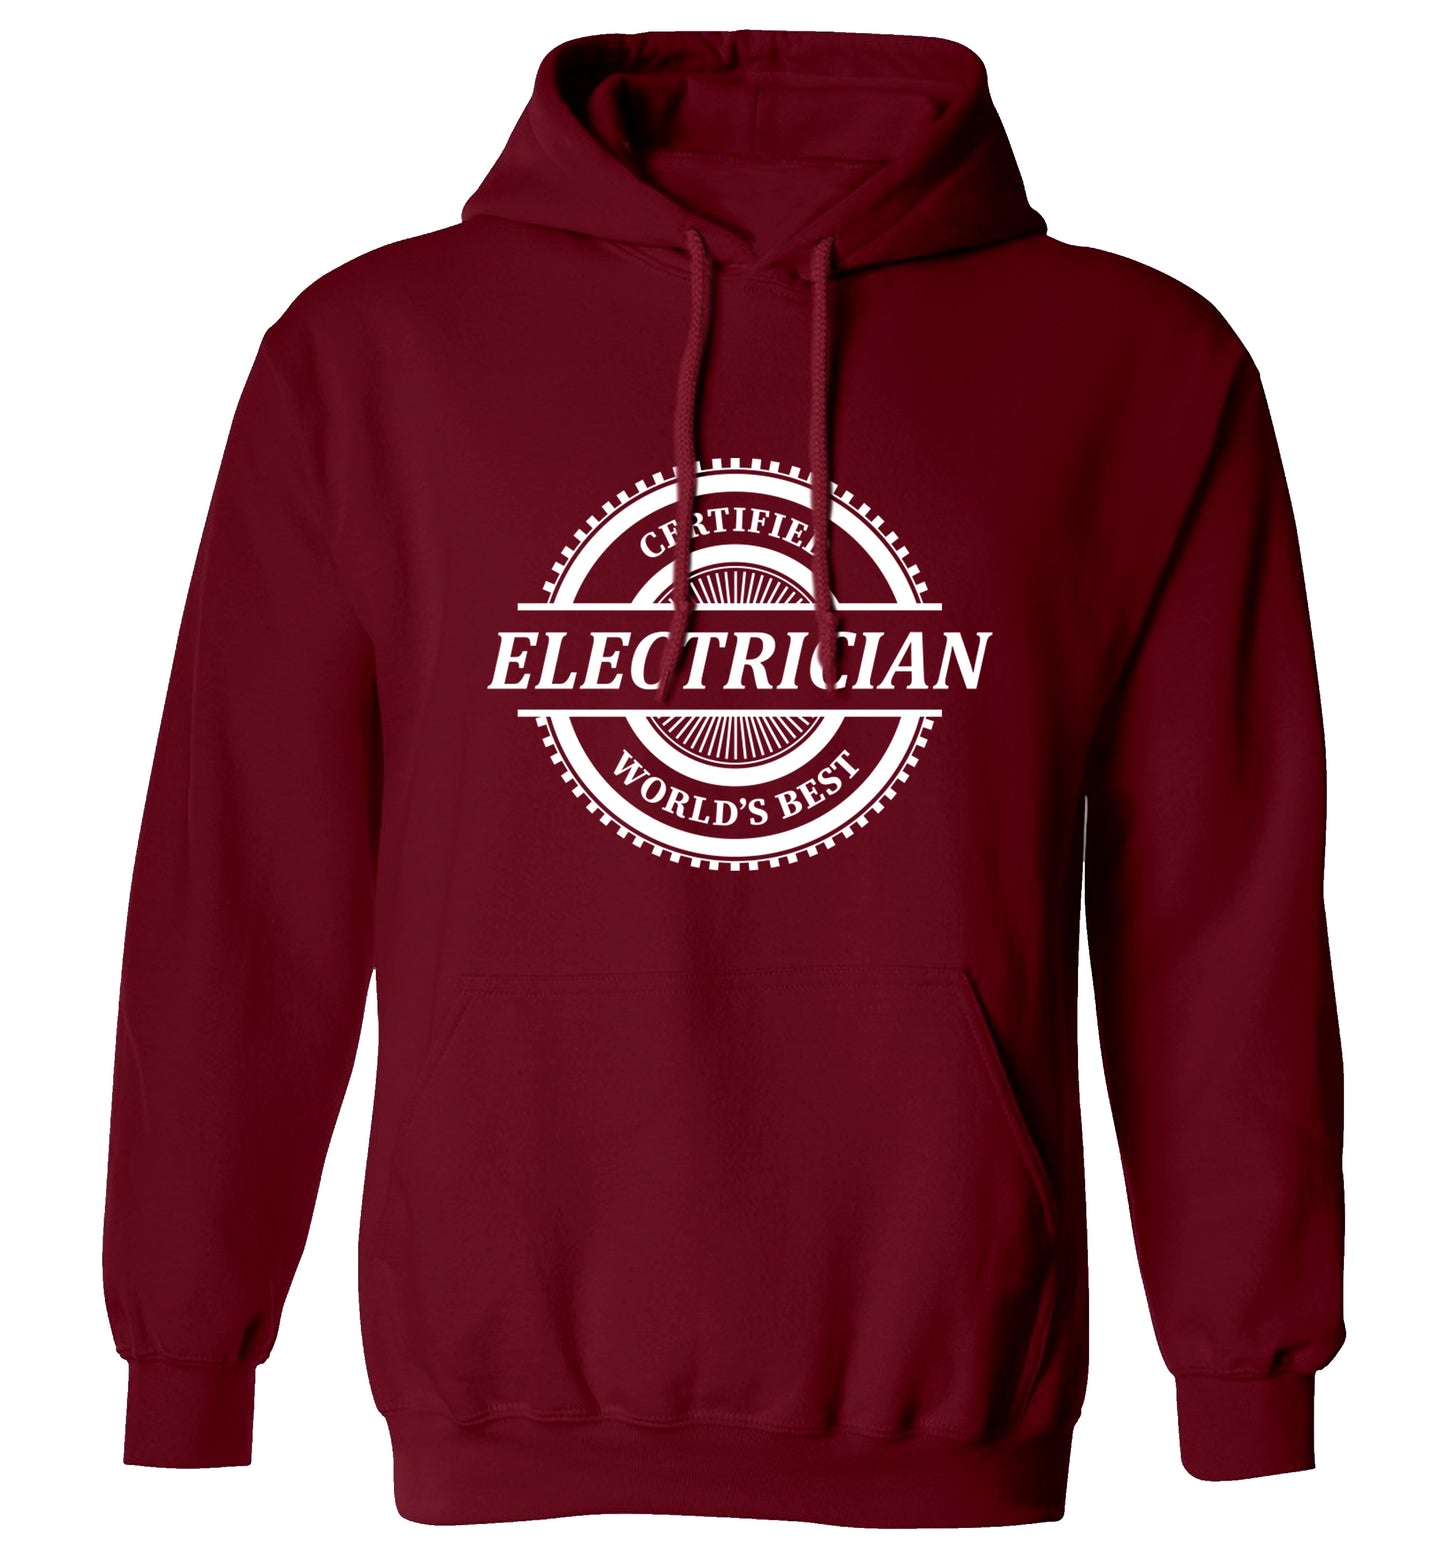 Worlds greatest electrician adults unisex maroon hoodie 2XL